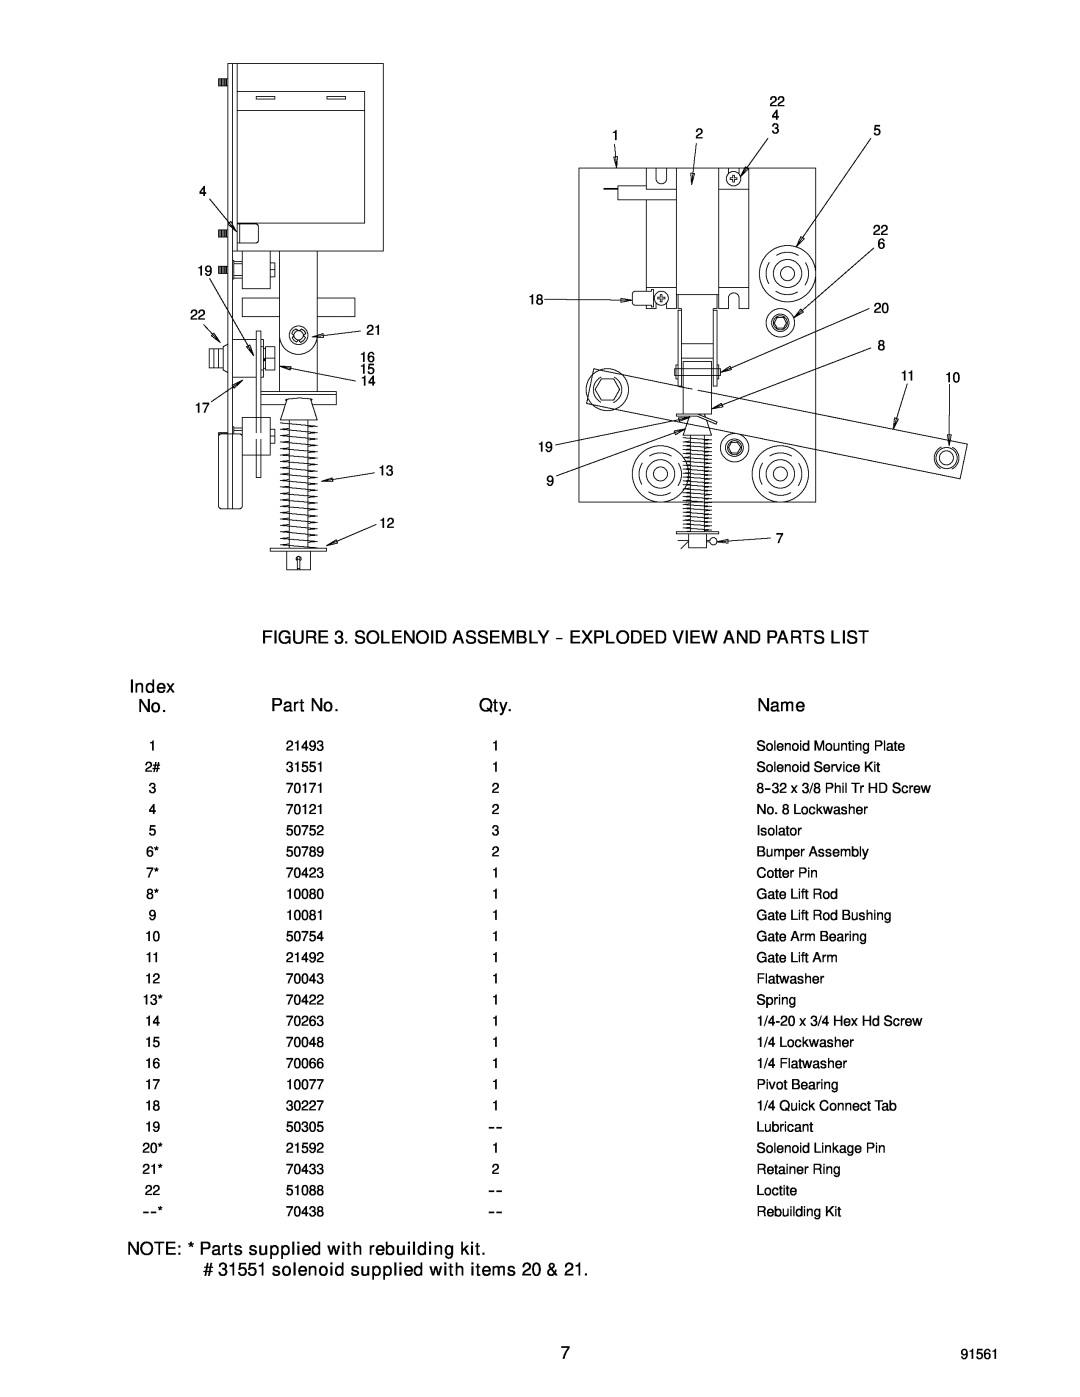 Cornelius D45 Solenoid Assembly -- Exploded View And Parts List, Name, NOTE * Parts supplied with rebuilding kit, Index 